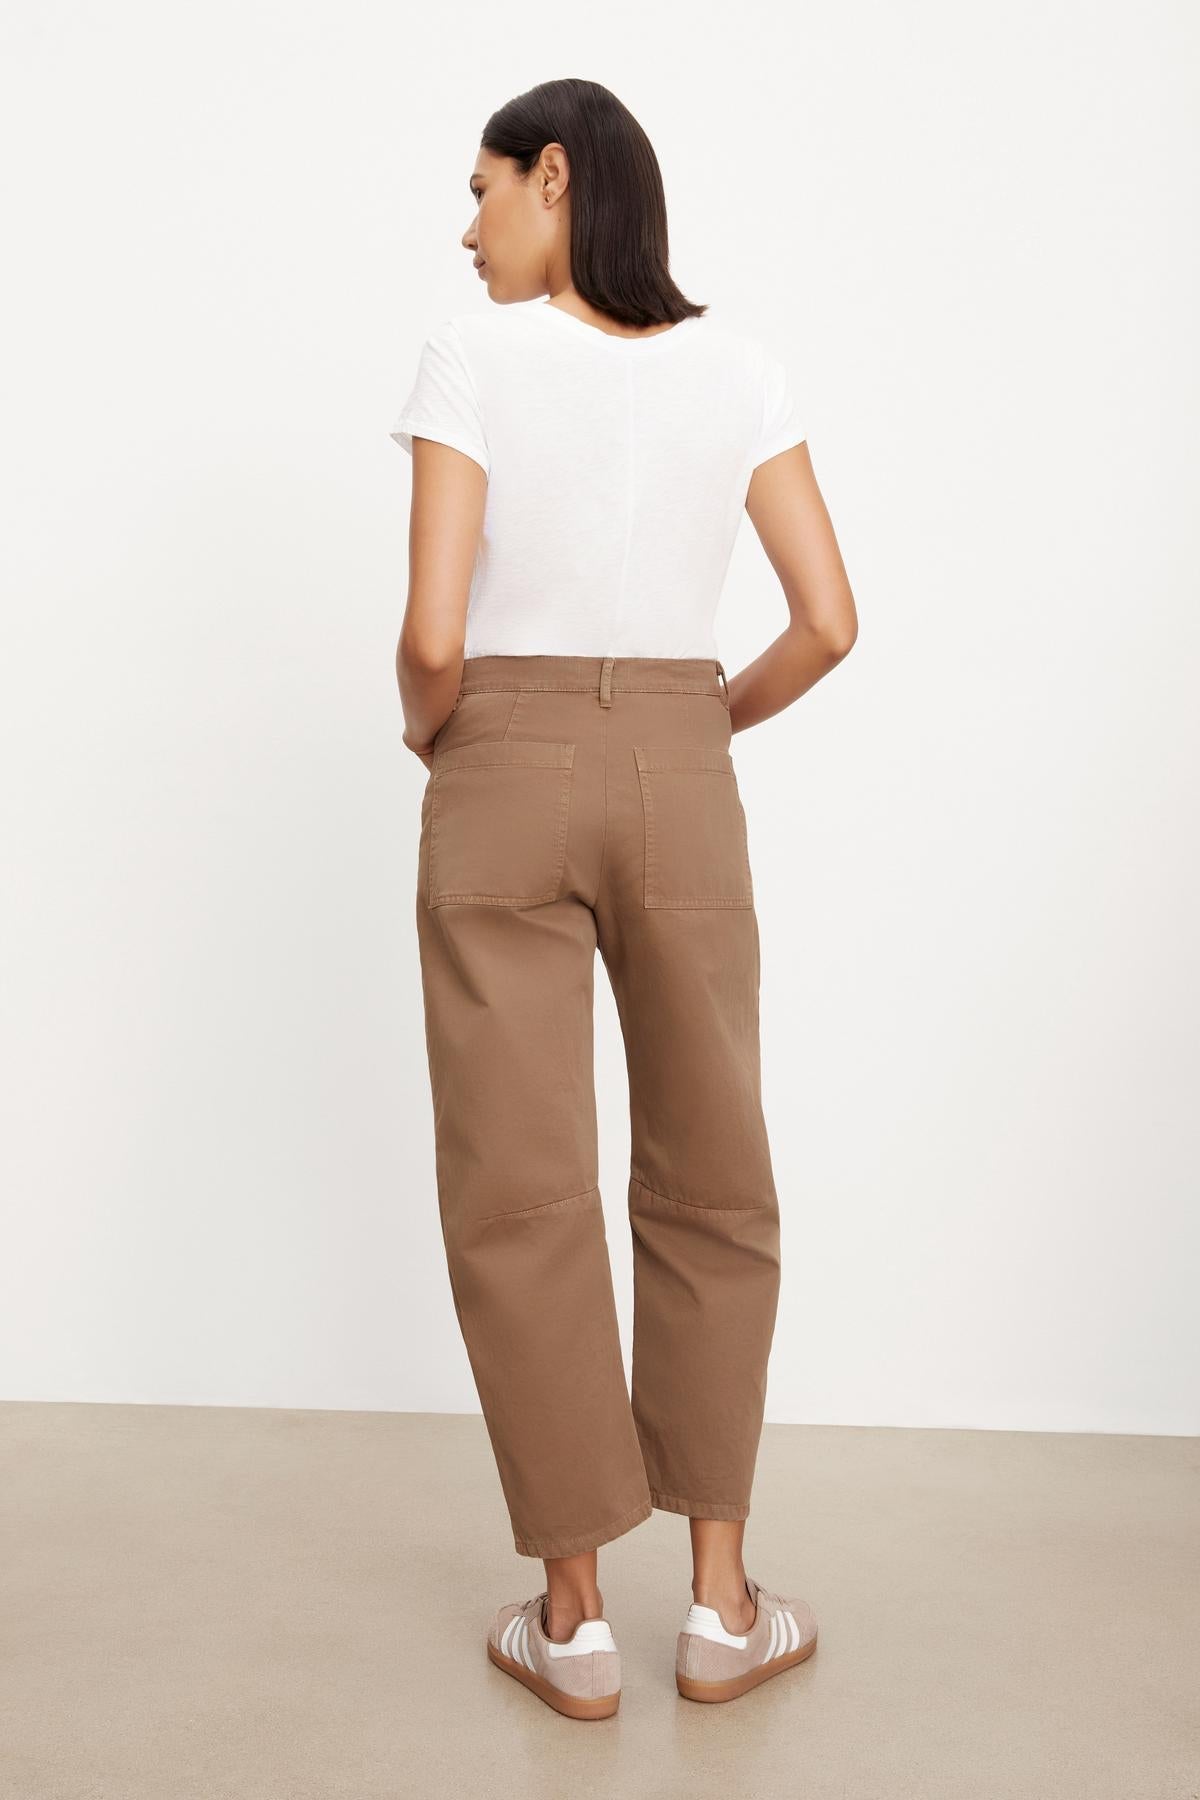   The back view of a woman wearing Velvet by Graham & Spencer's BRYLIE SANDED TWILL UTILITY PANT with curved silhouette. 